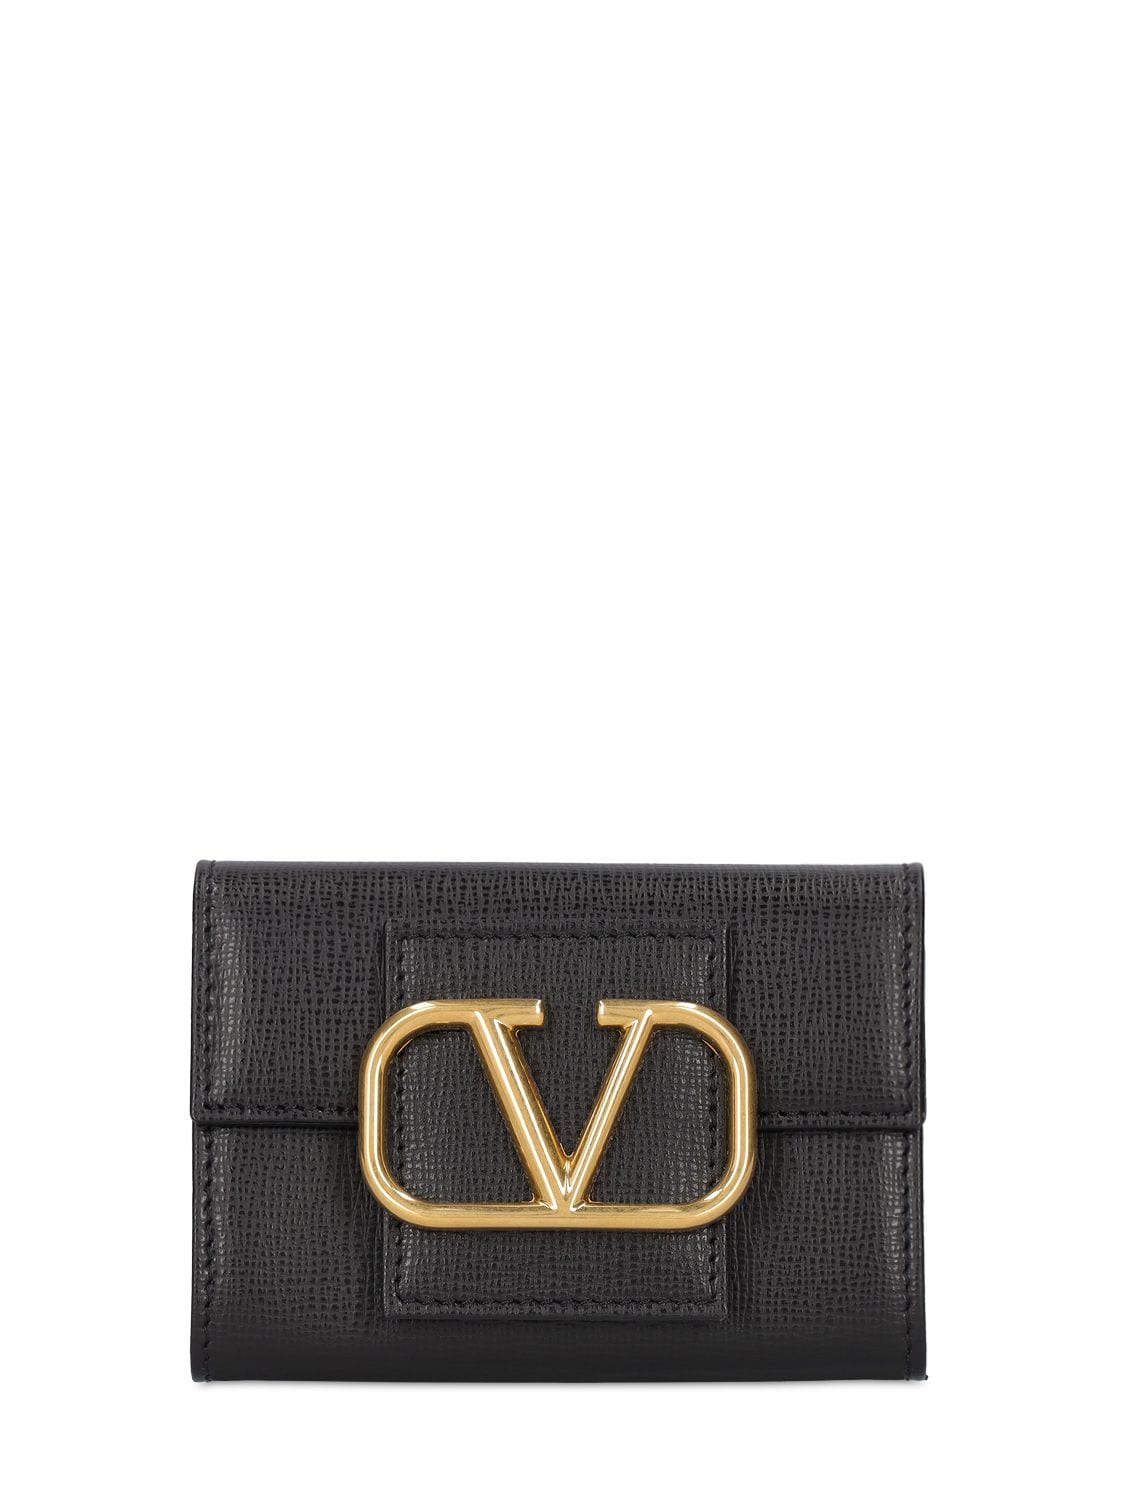 Image of Vlogo Grained Leather Card Holder